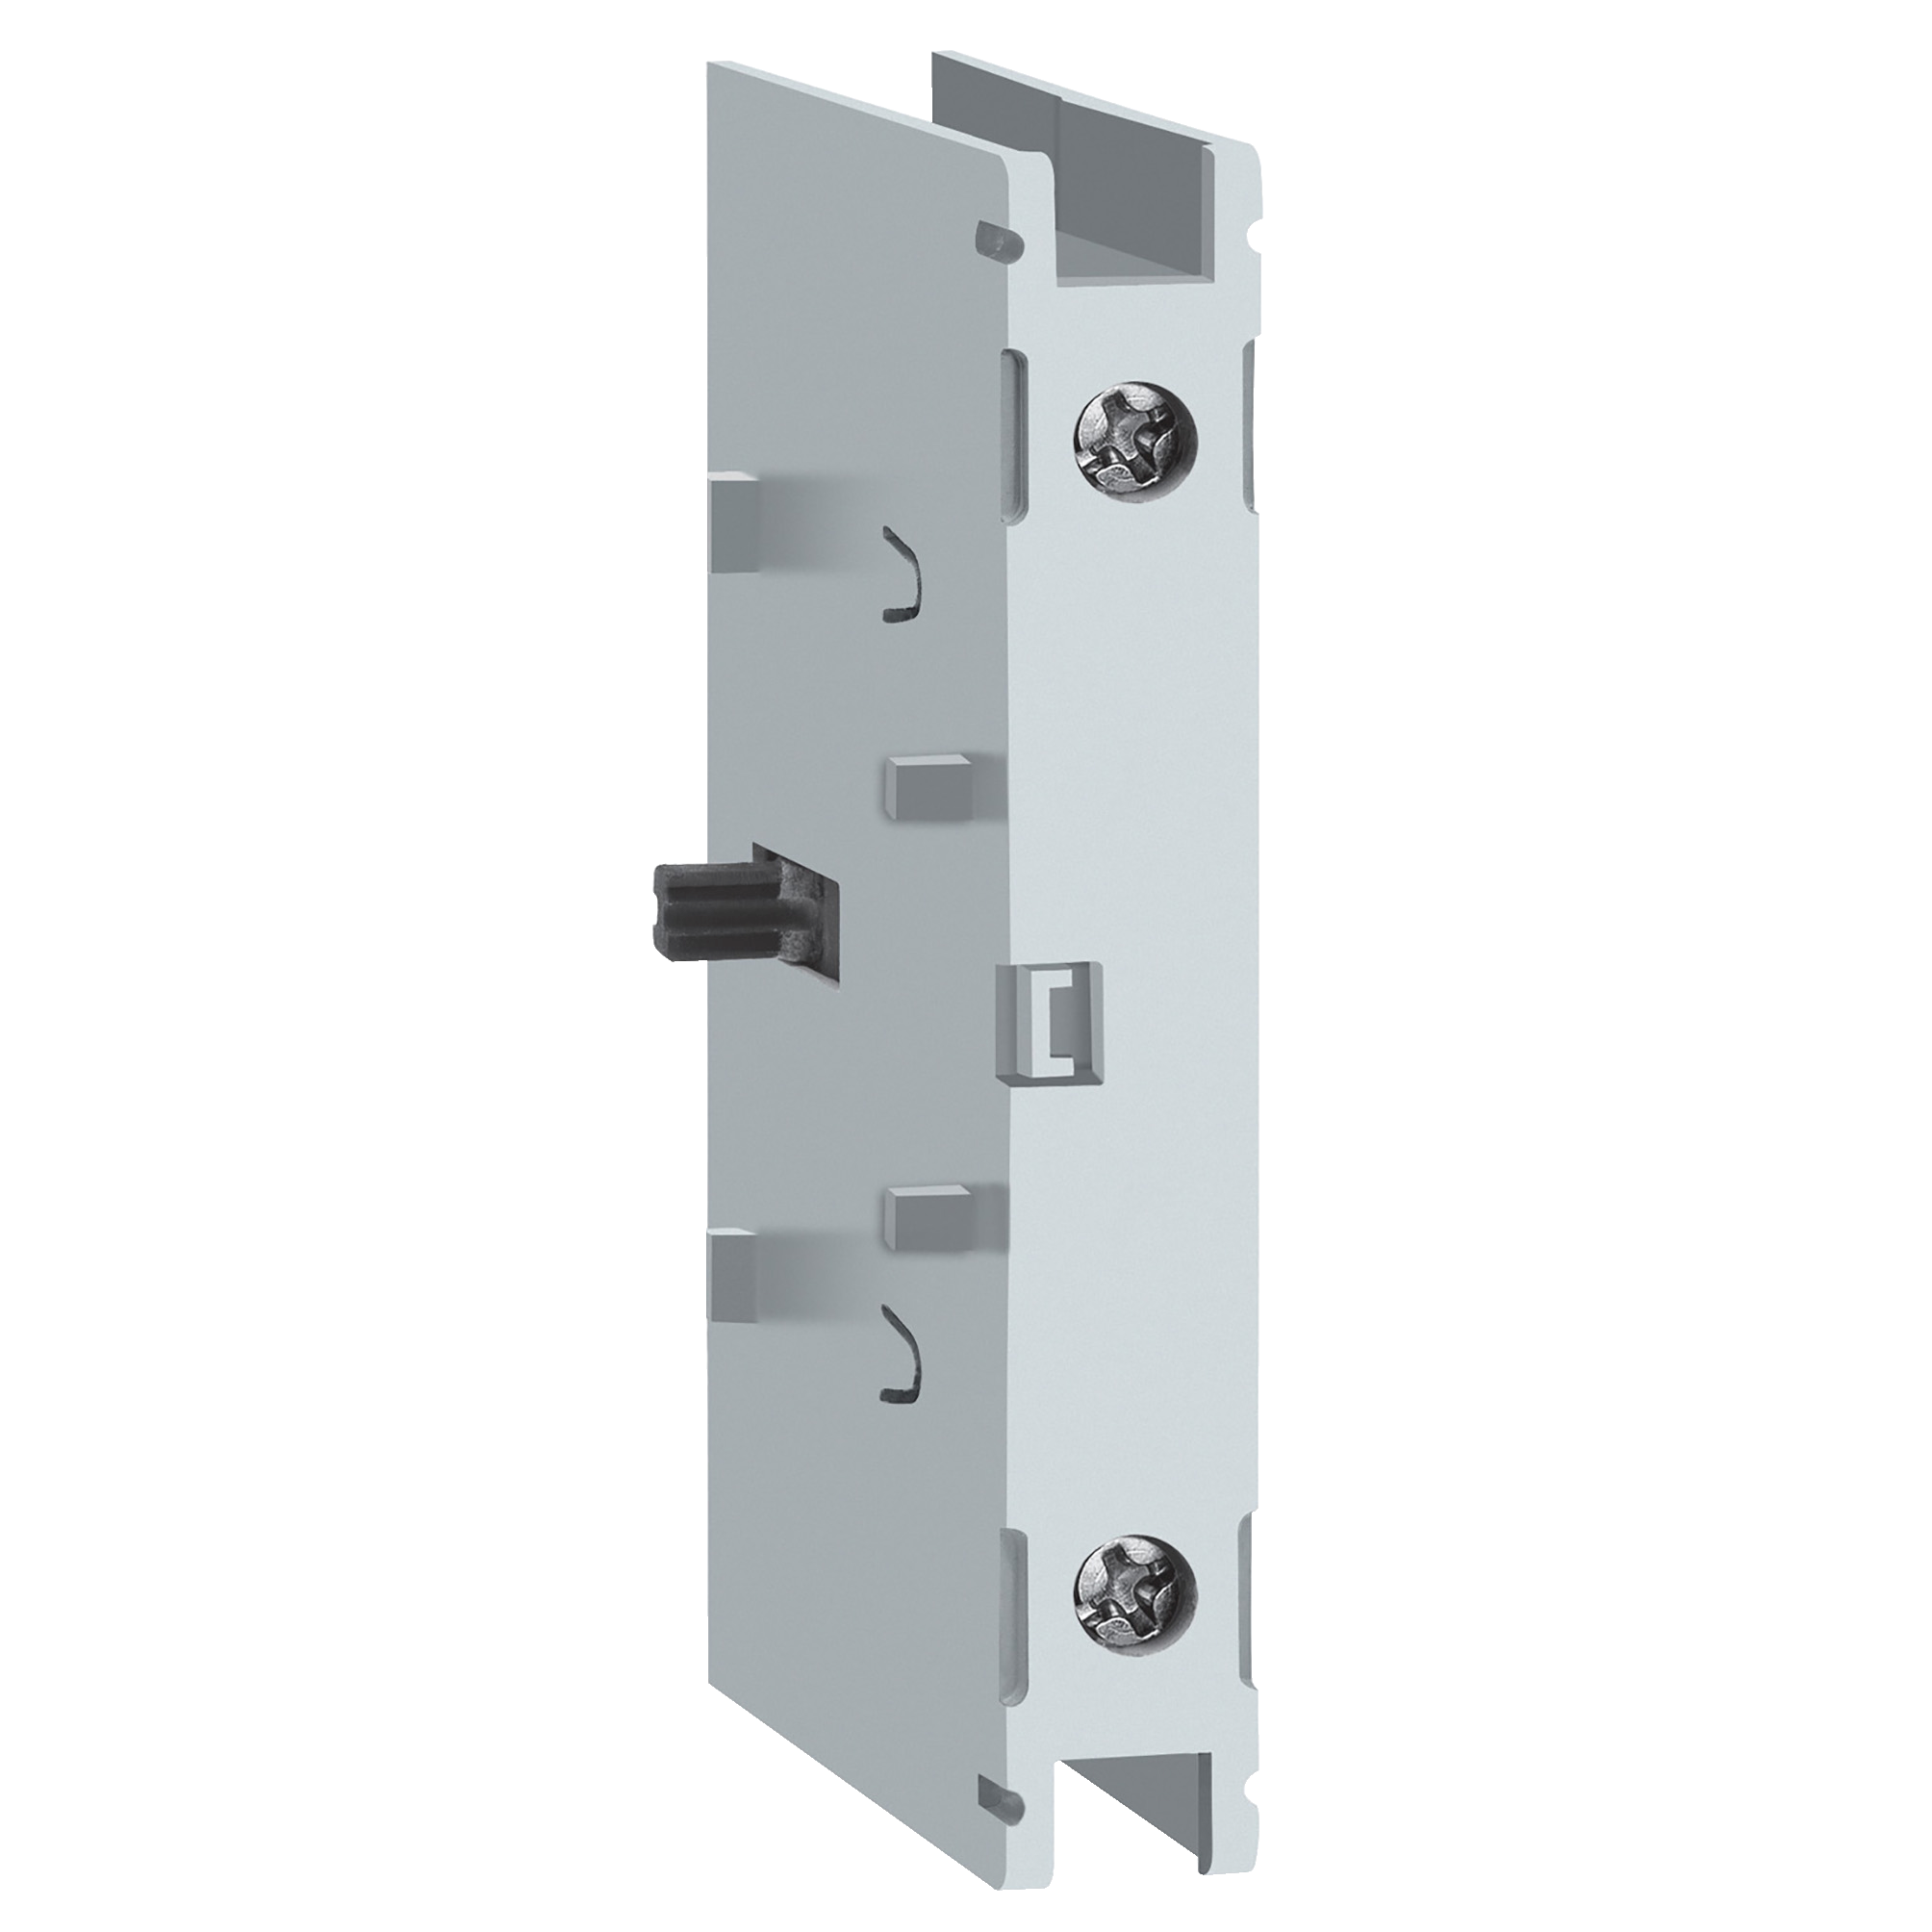 Disconnect switch, TeSys VLS, additional pole, 63A, for 30A and 63A switch, size 2, DIN rail